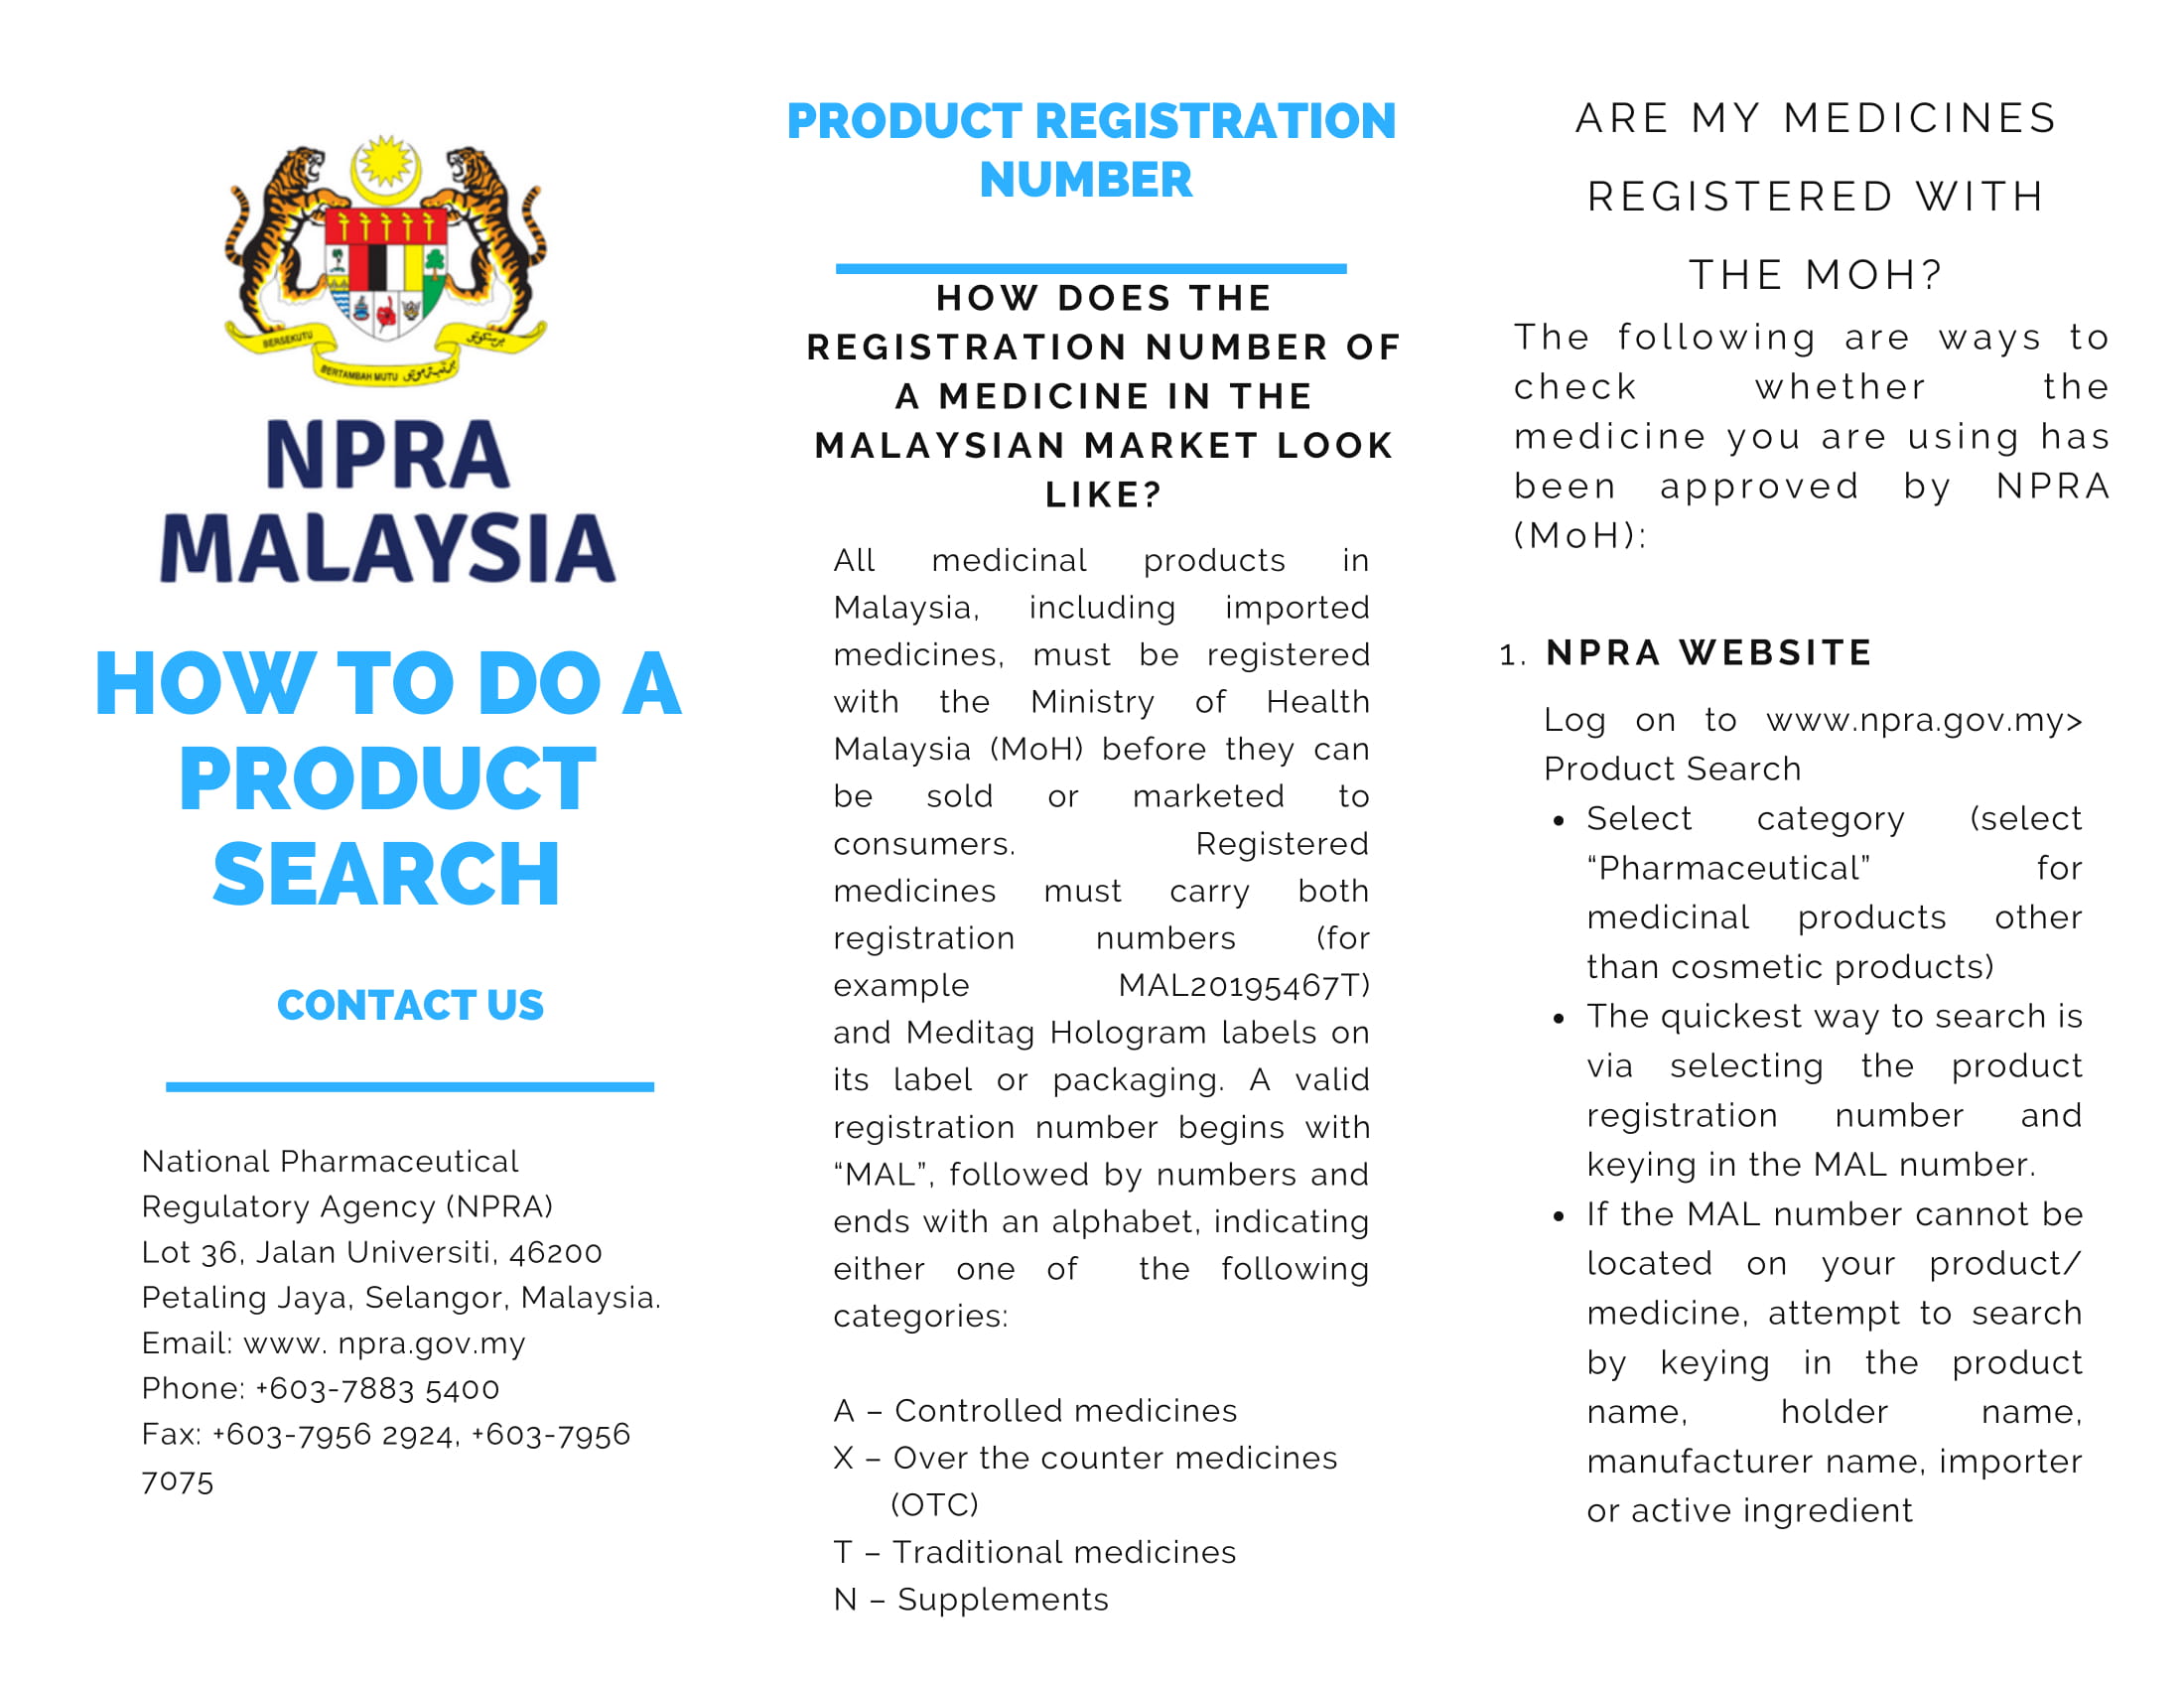 Npra.gov.my product search